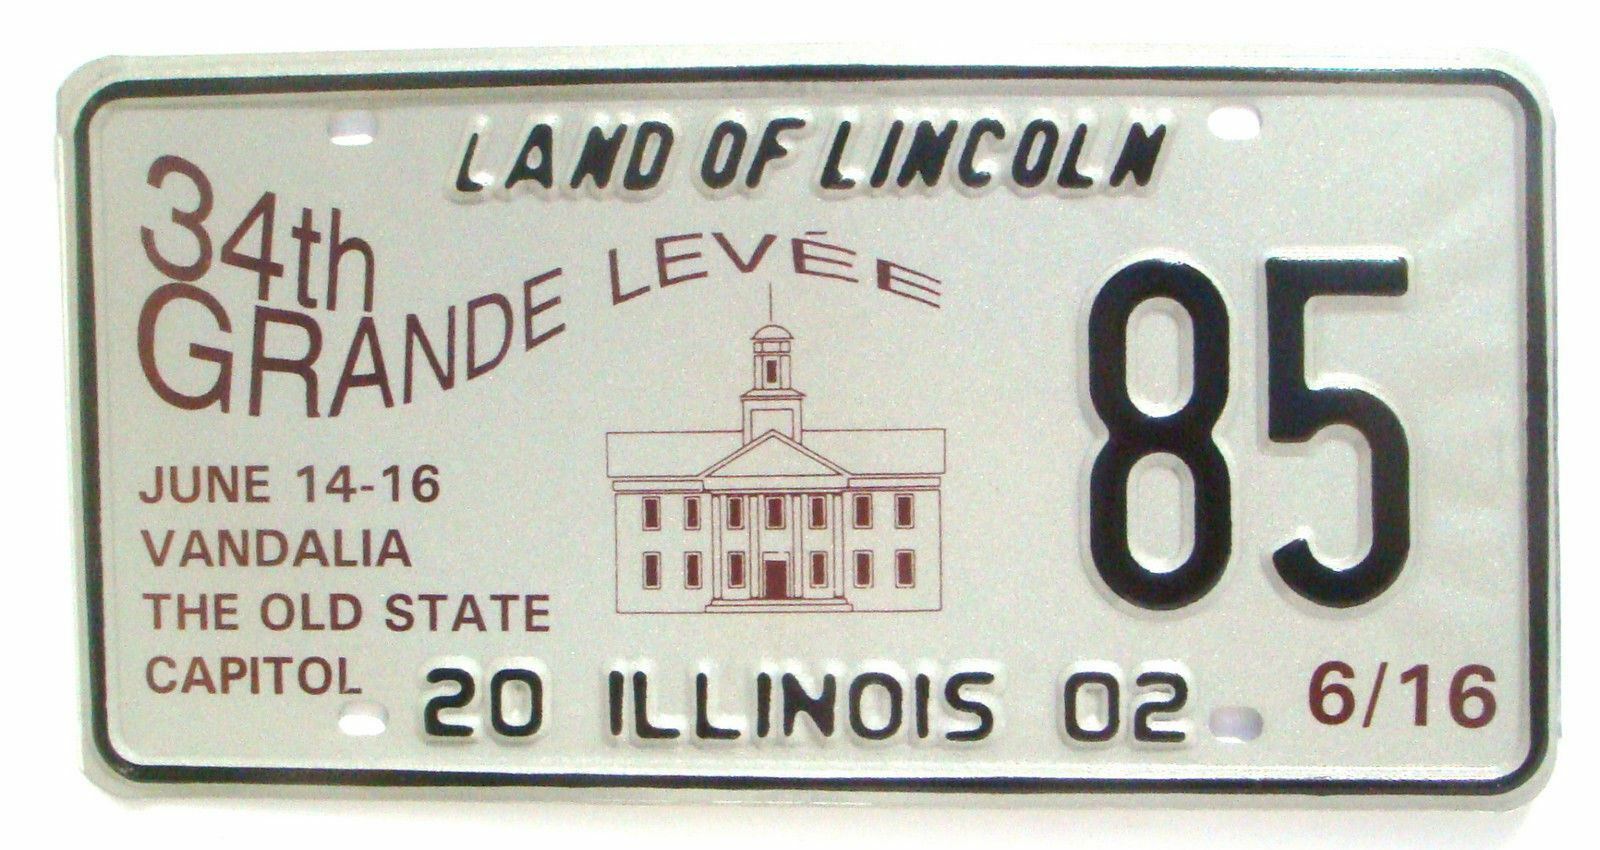 Illinois 2002 Old Capitol License Plate Grande Levee Special Event Car Tag Bar